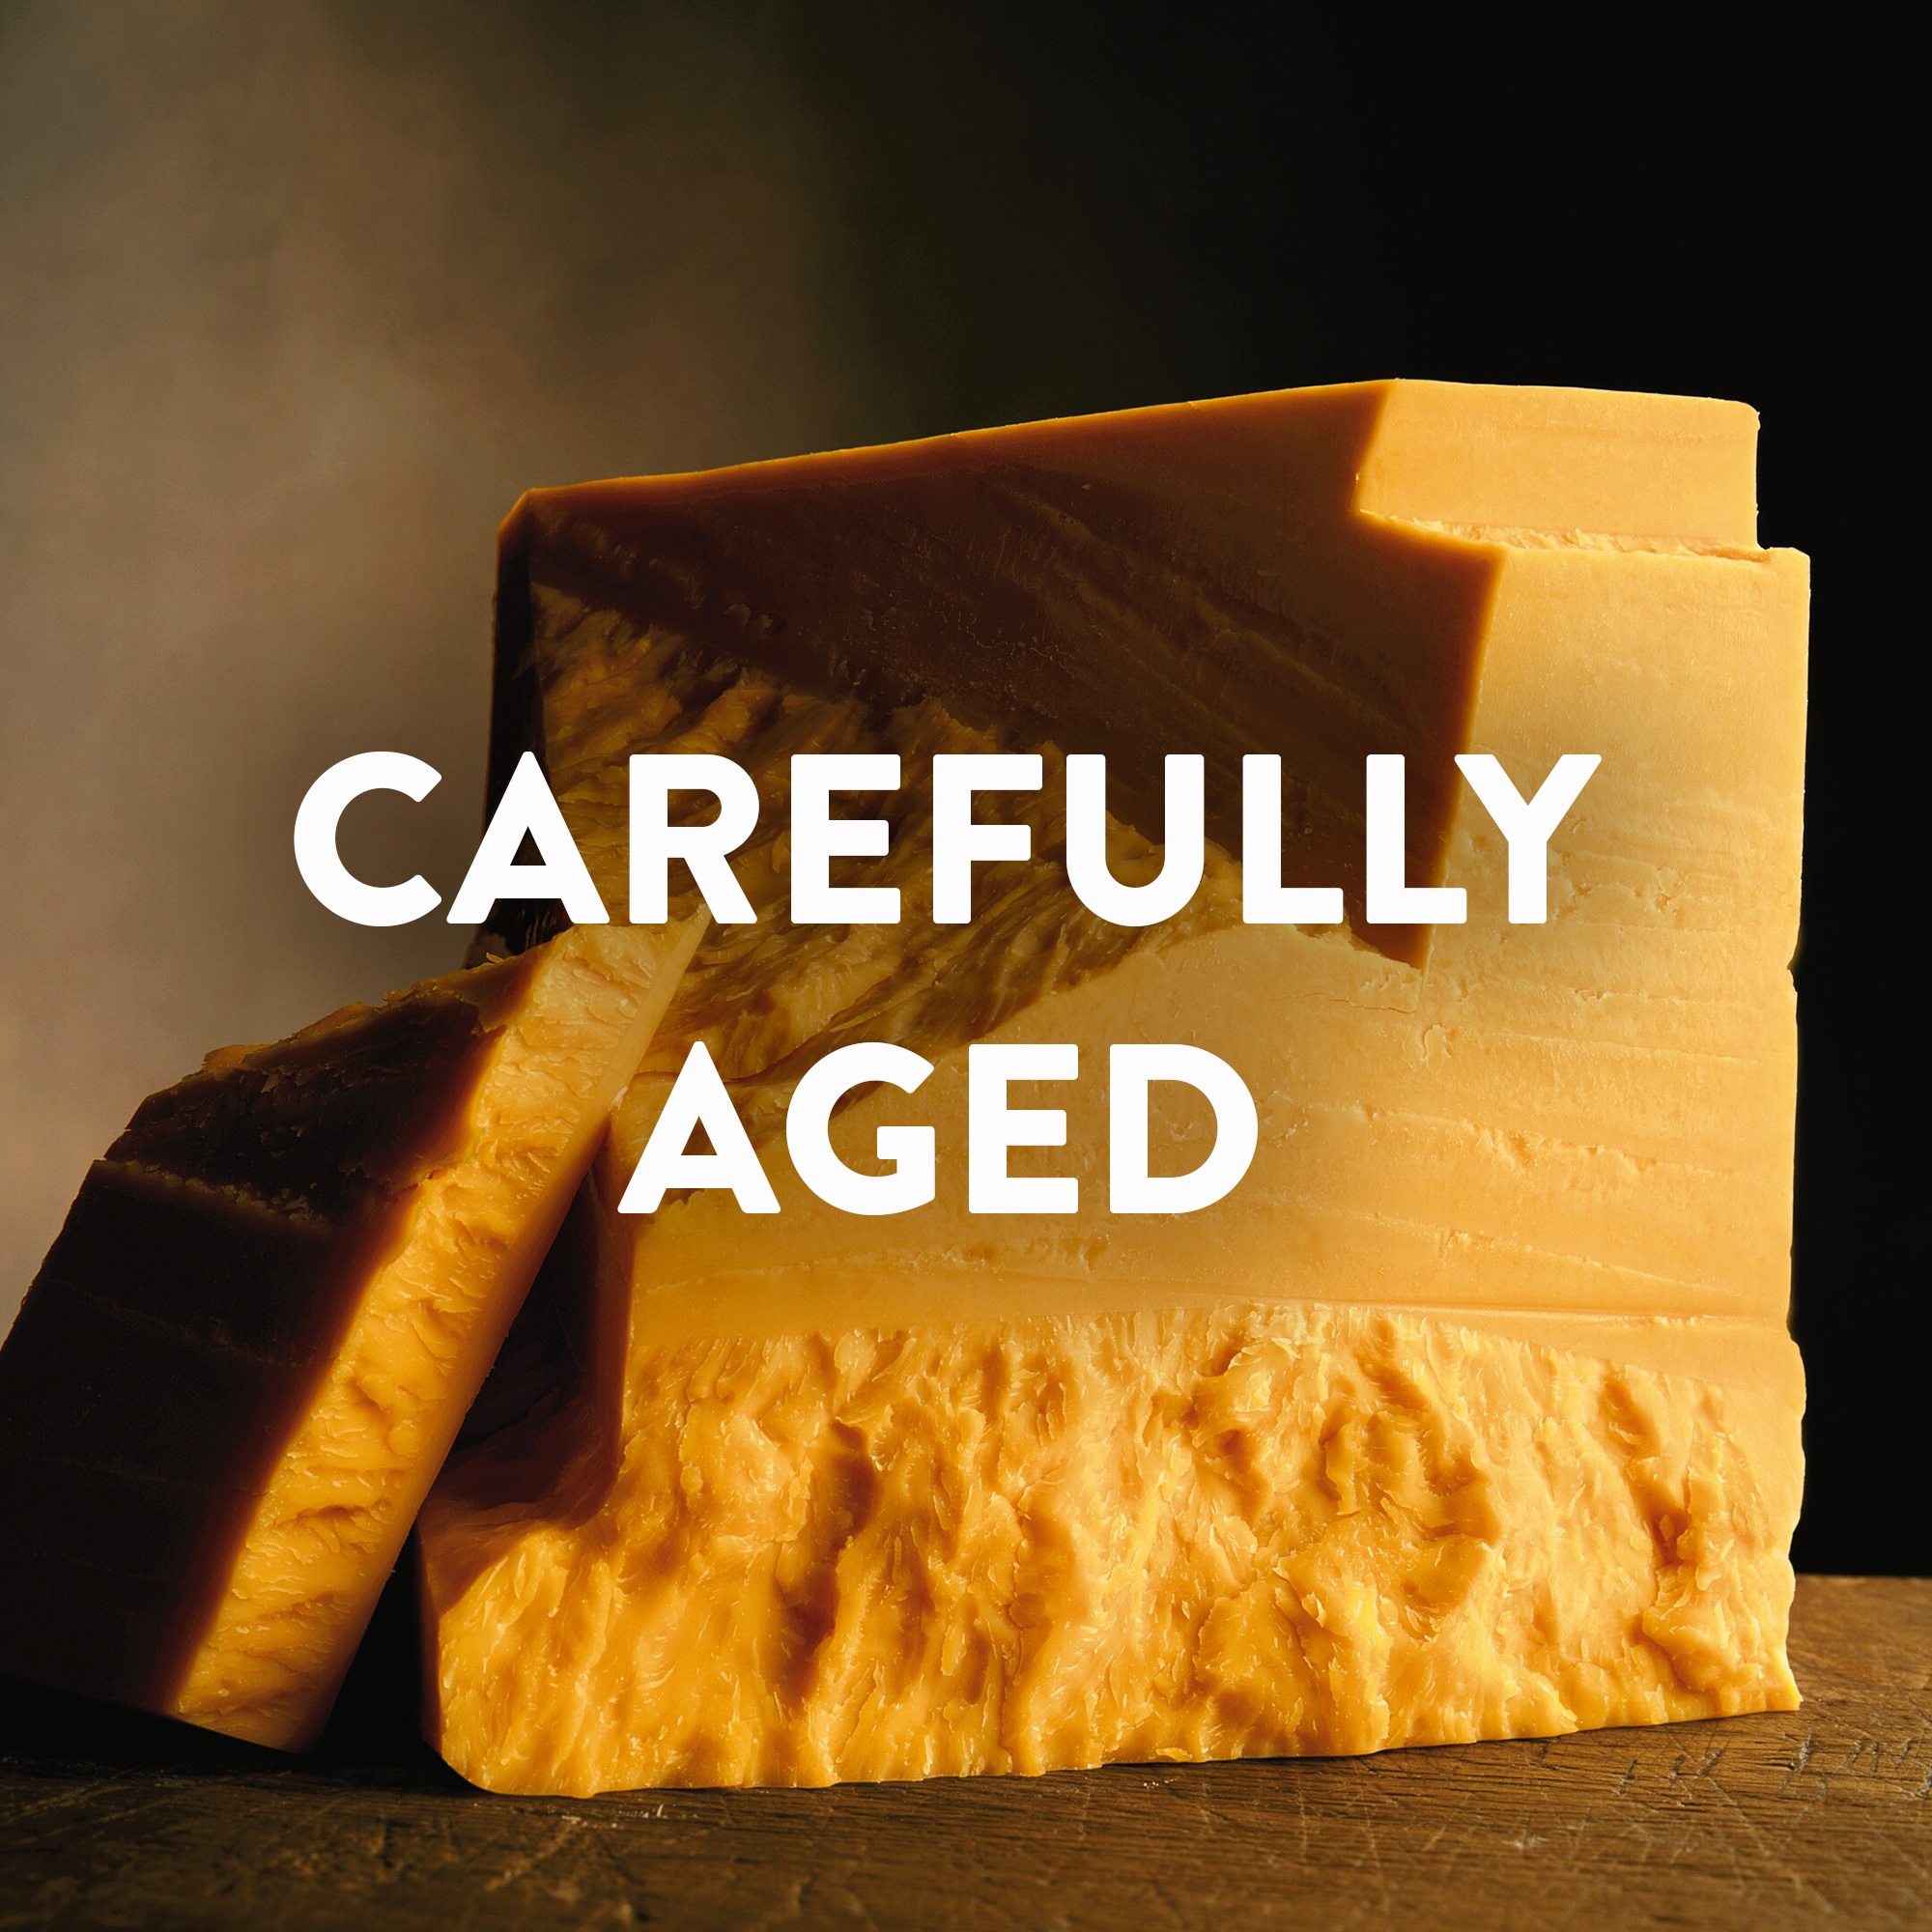 Sargento® Reserve Series™ Shredded 18-Month Aged Natural Cheddar Cheese